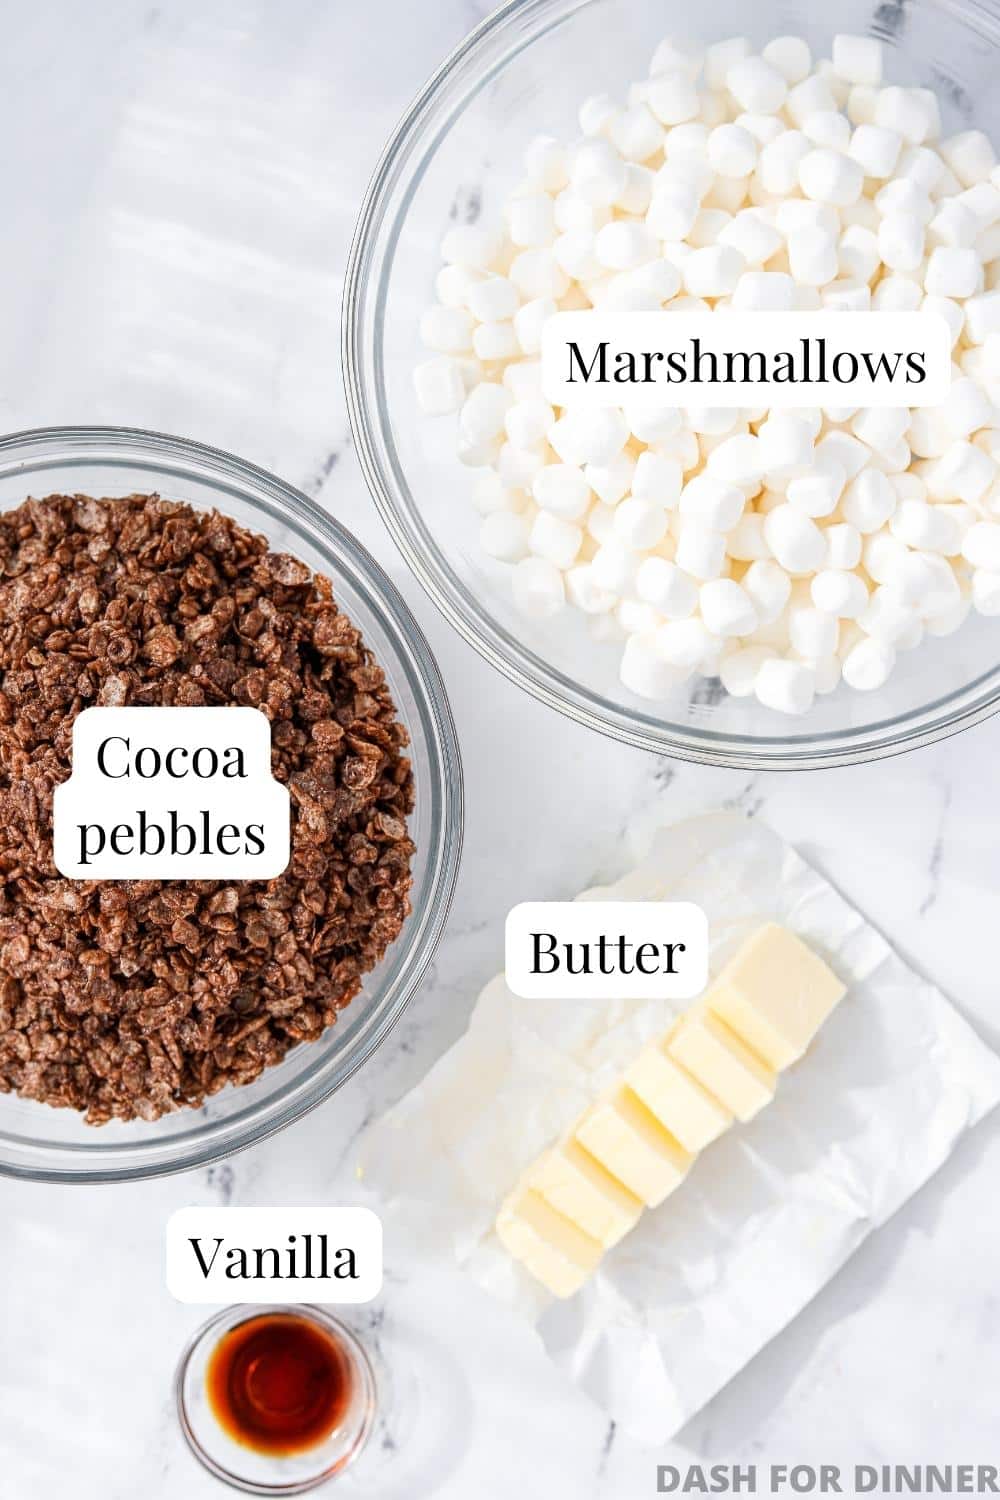 A bowl of marshmallows, Cocoa pebbles cereal, butter, and vanilla.